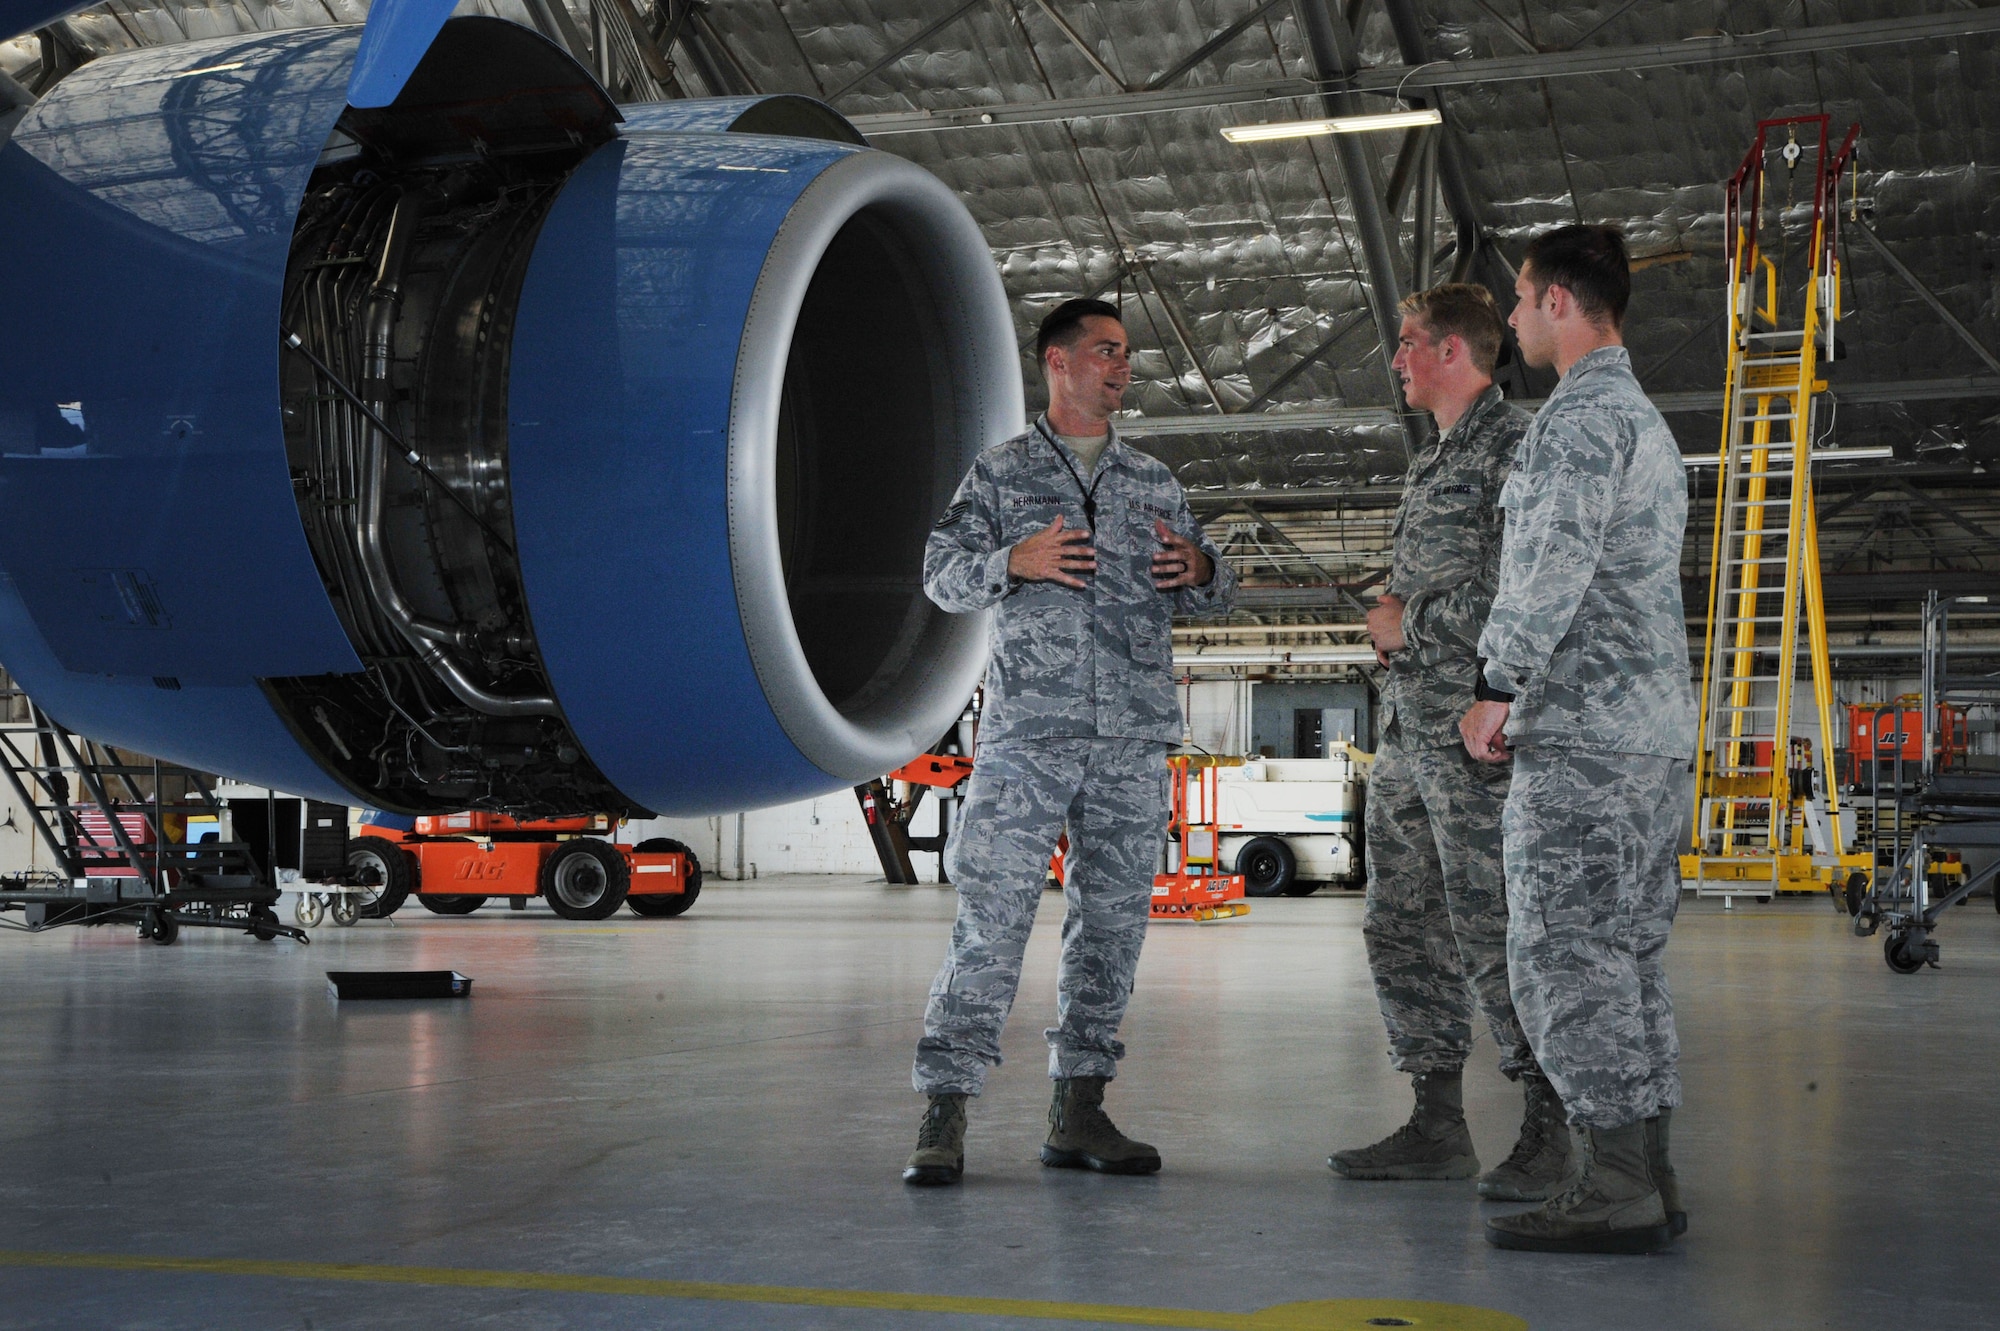 Tech Sgt. Siggy Herrmann of the 89th Airlift Wing, Joint Base Andrews, Md., gives a group of U.S. Air Force Academy cadets a tour of the various aircraft assigned to the 89th Airlift Wing. The cadets were visiting Joint Base Andrews as part of the U.S. Air Force Academy's Operations Air Force program. (Photo by U.S. Air Force Senior Master Sgt. Adrian Cadiz)(Released)
